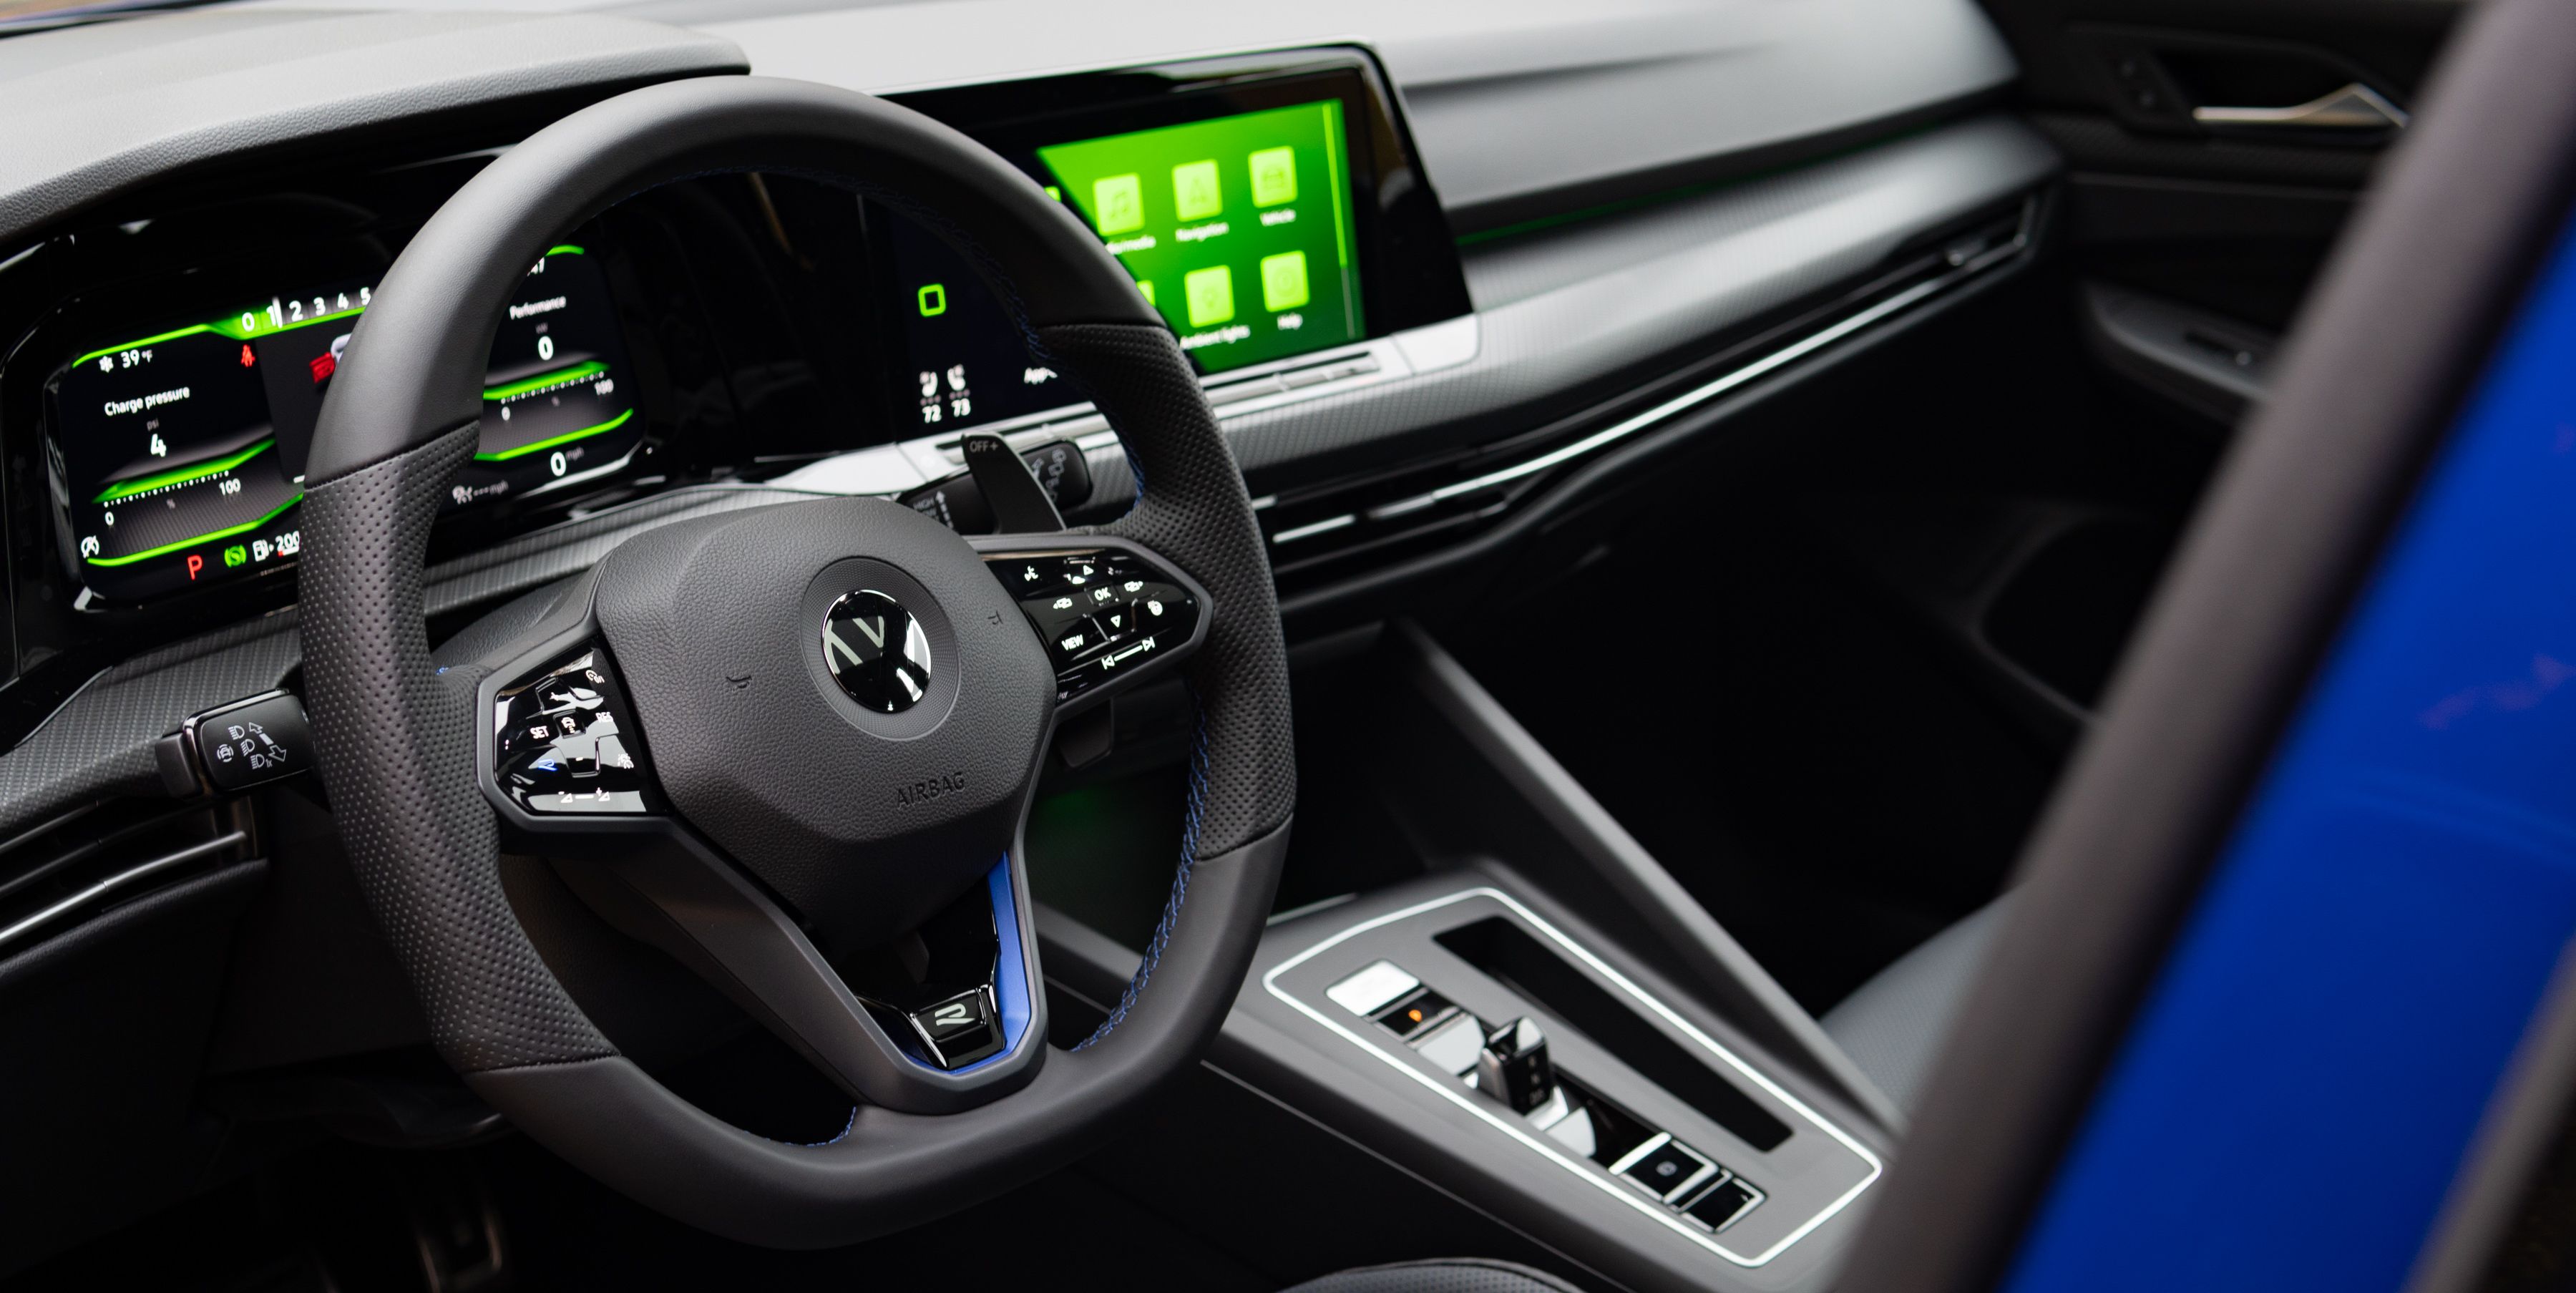 Volkswagen Is Bringing Actual Buttons Back to Its Steering Wheels